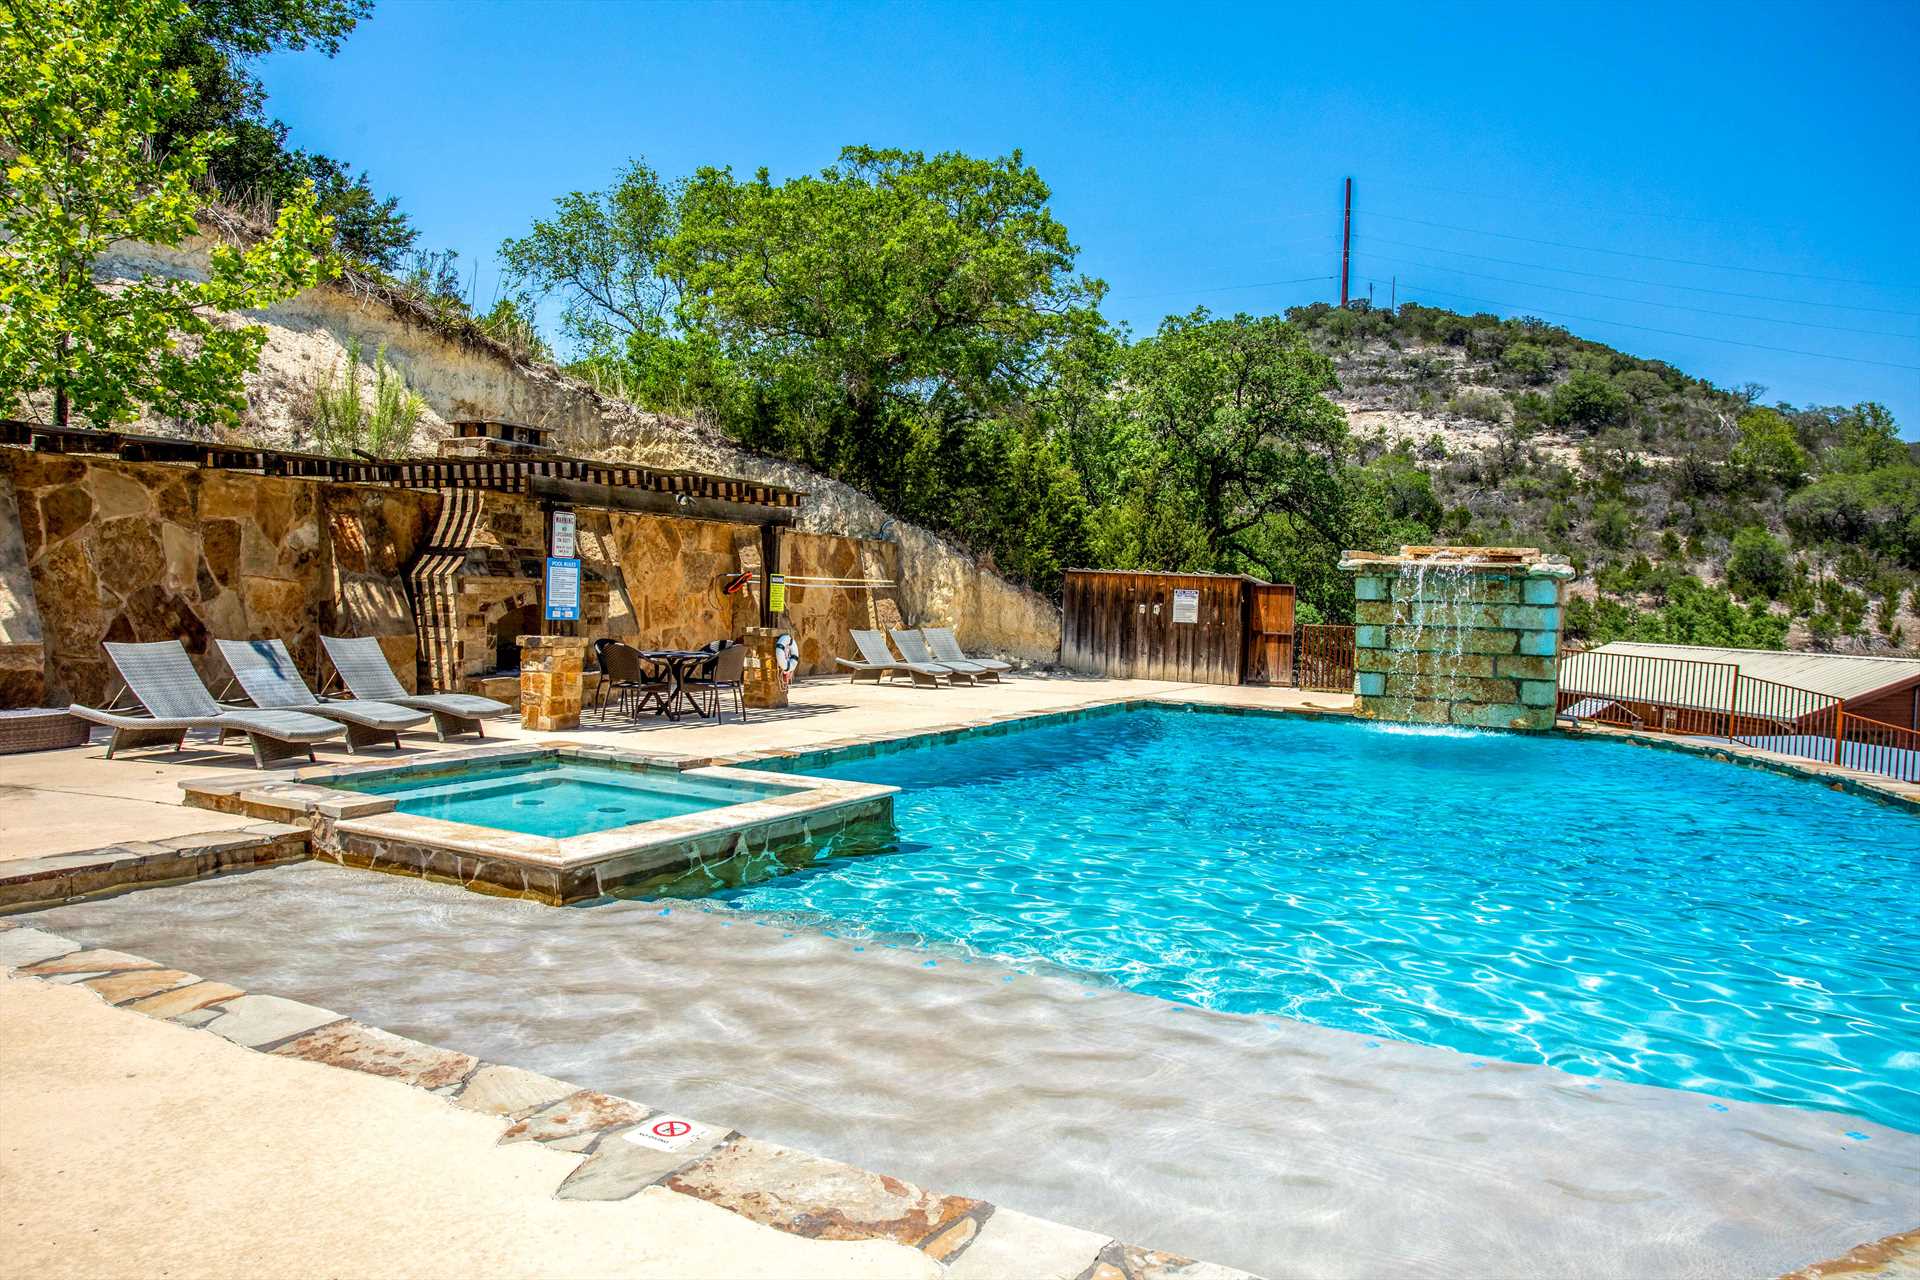                                                 Here's where you beat the Texas heat! The pool includes a waterfall feature and separate hot tub.